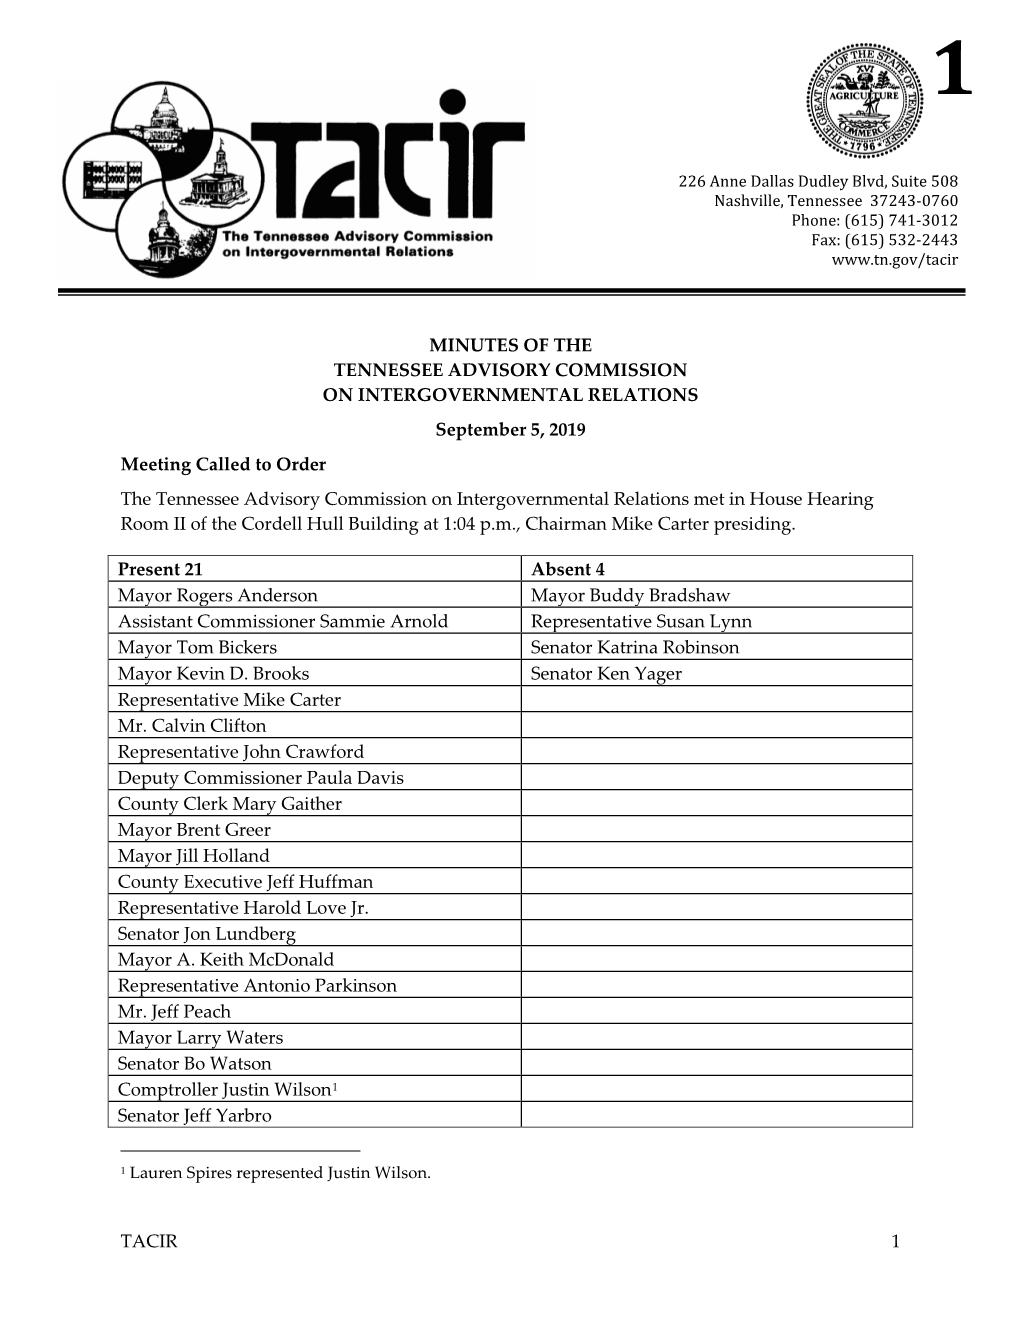 Minutes of September 2019 TACIR Commission Meeting